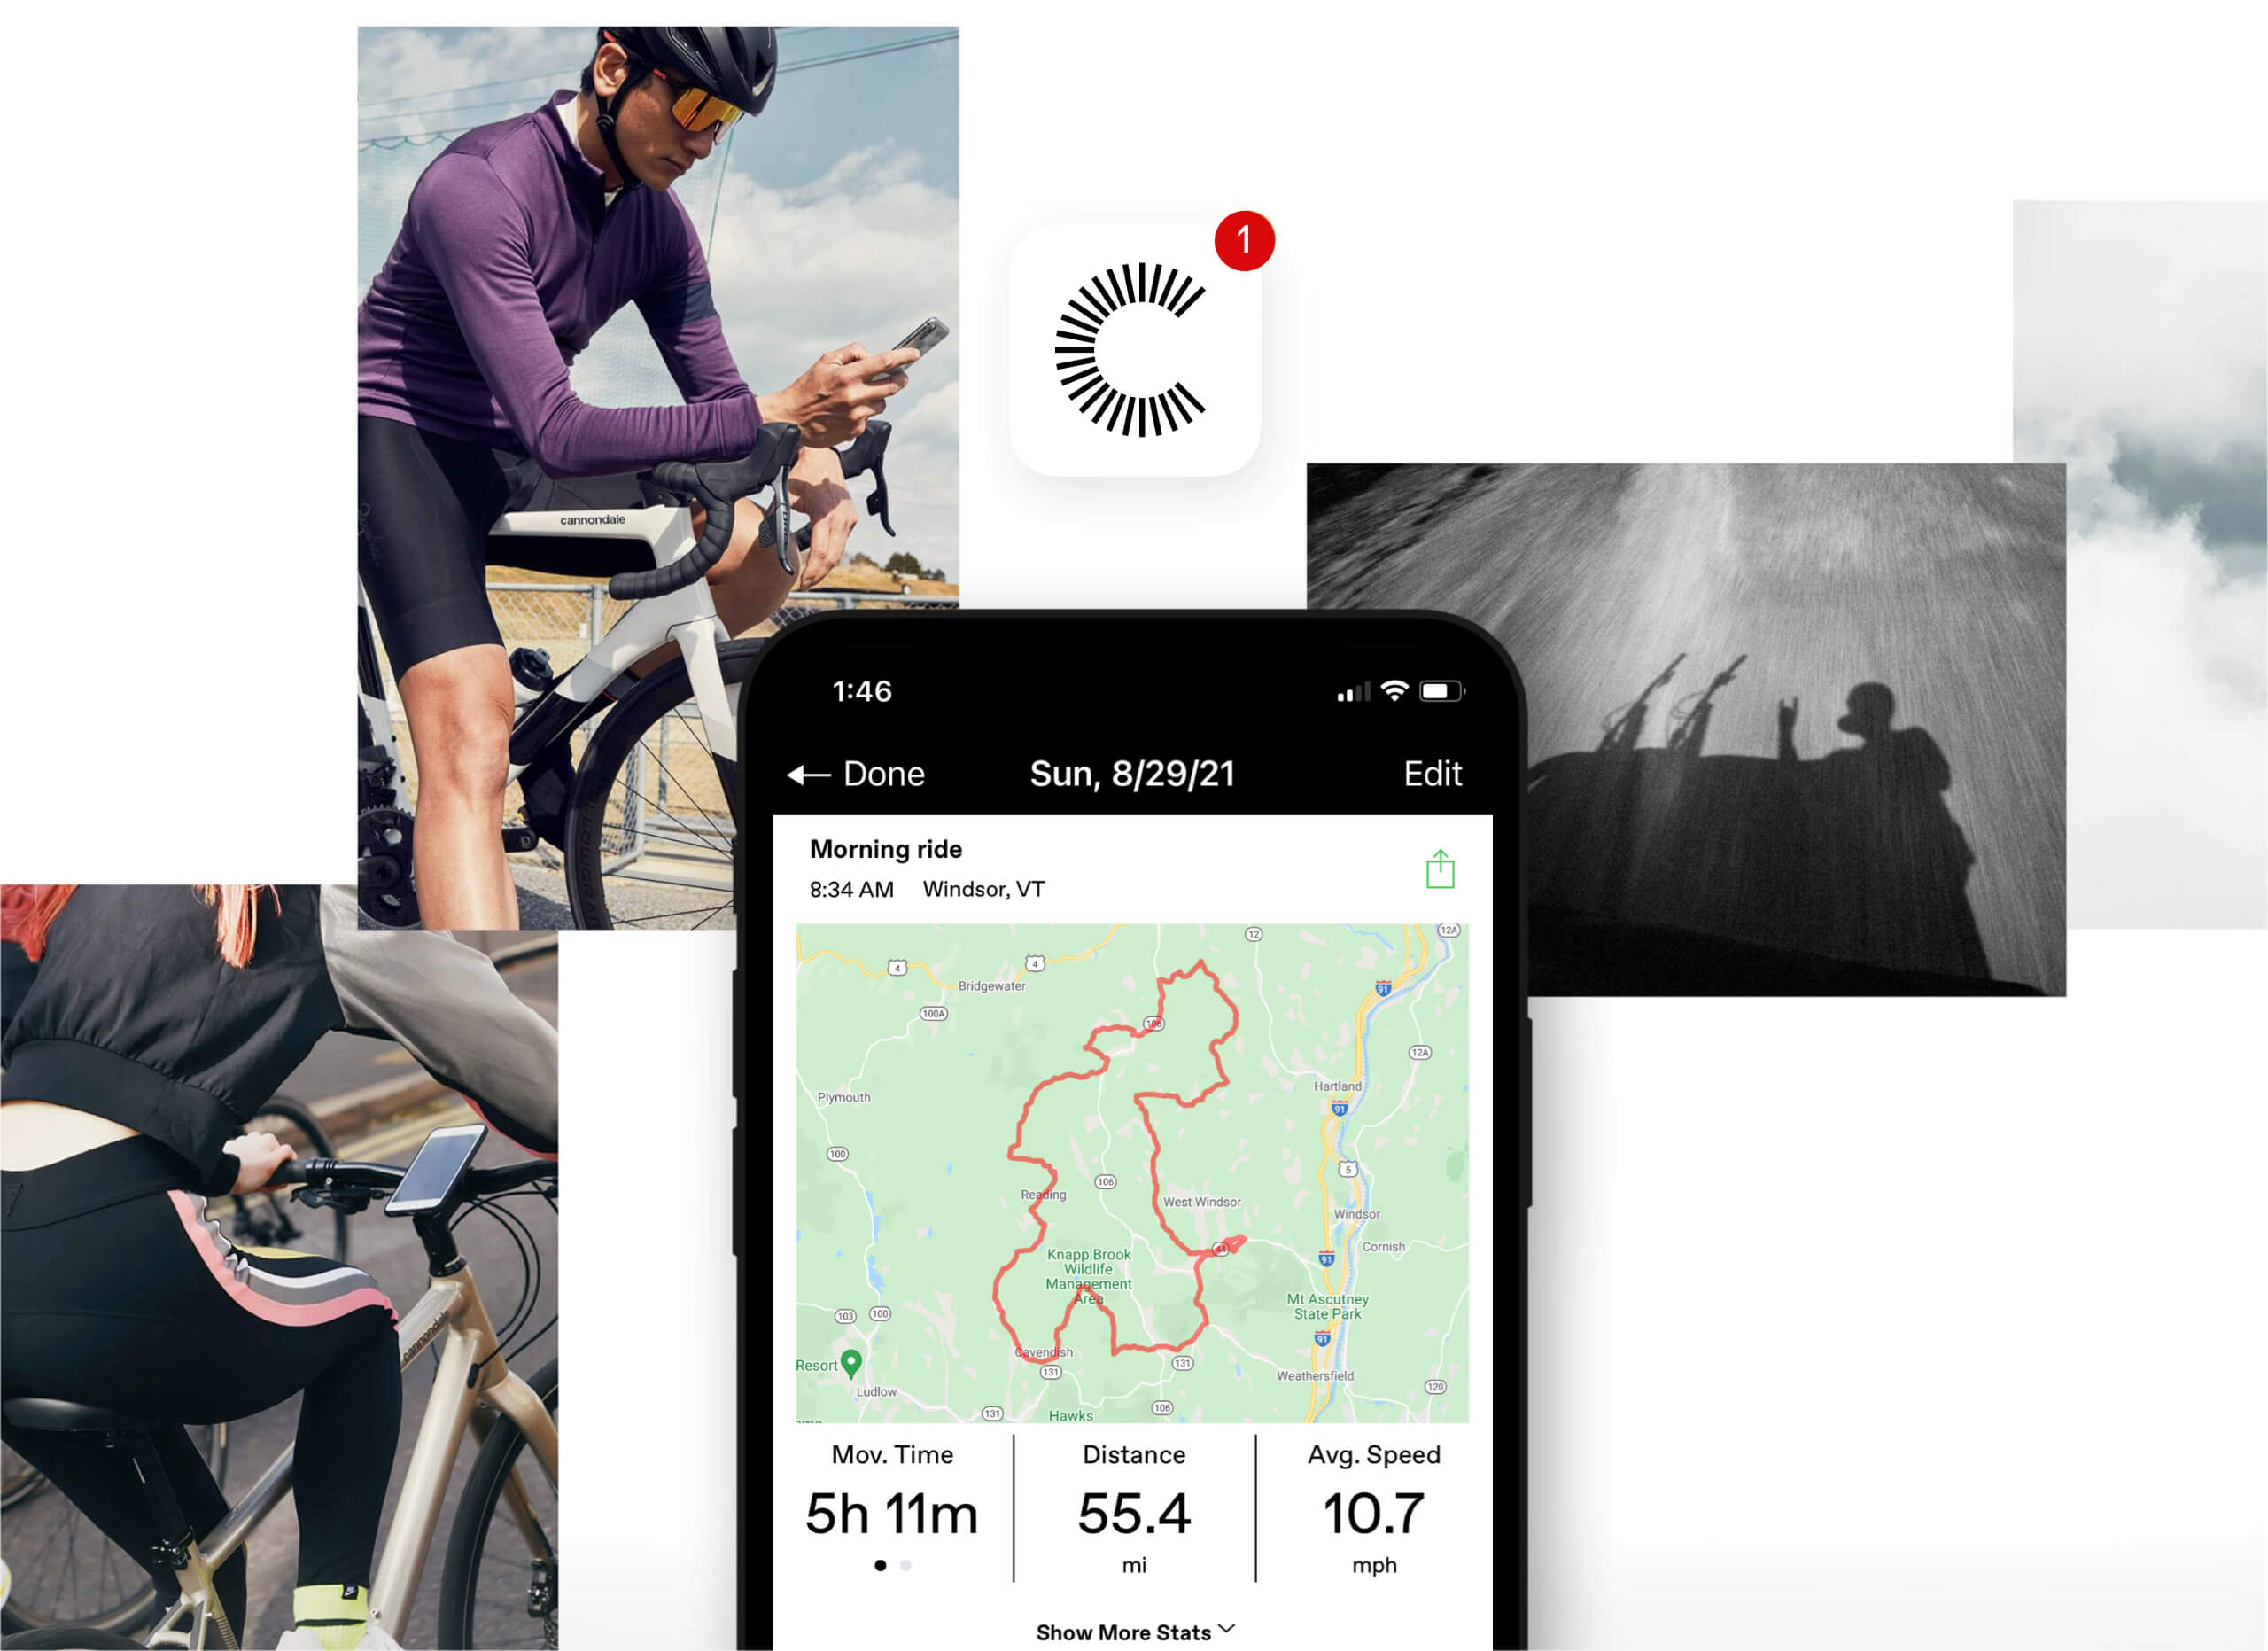 The Cannondale App